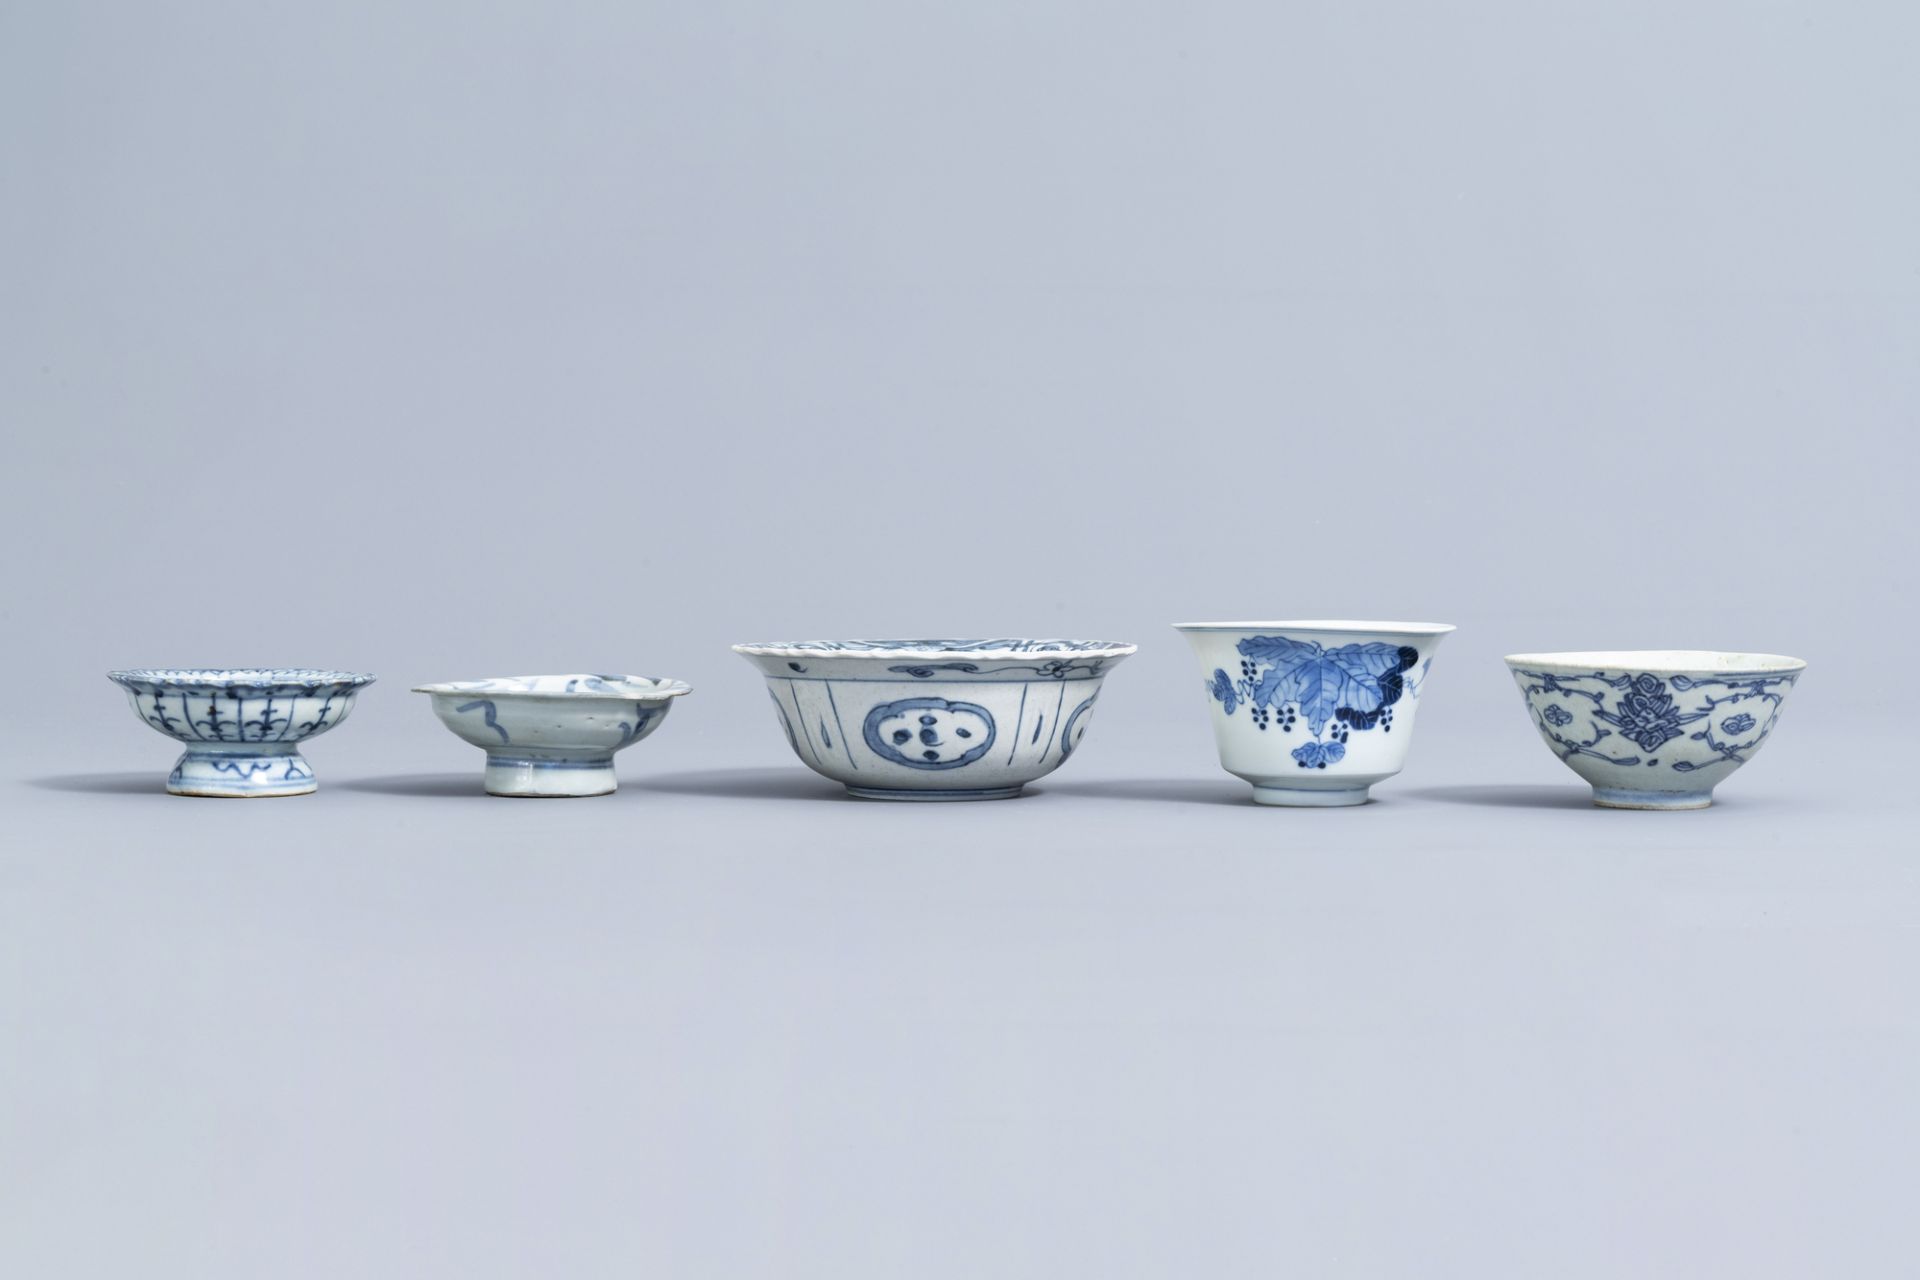 A varied collection of Chinese blue and white porcelain, 19th/20th C. - Image 8 of 13